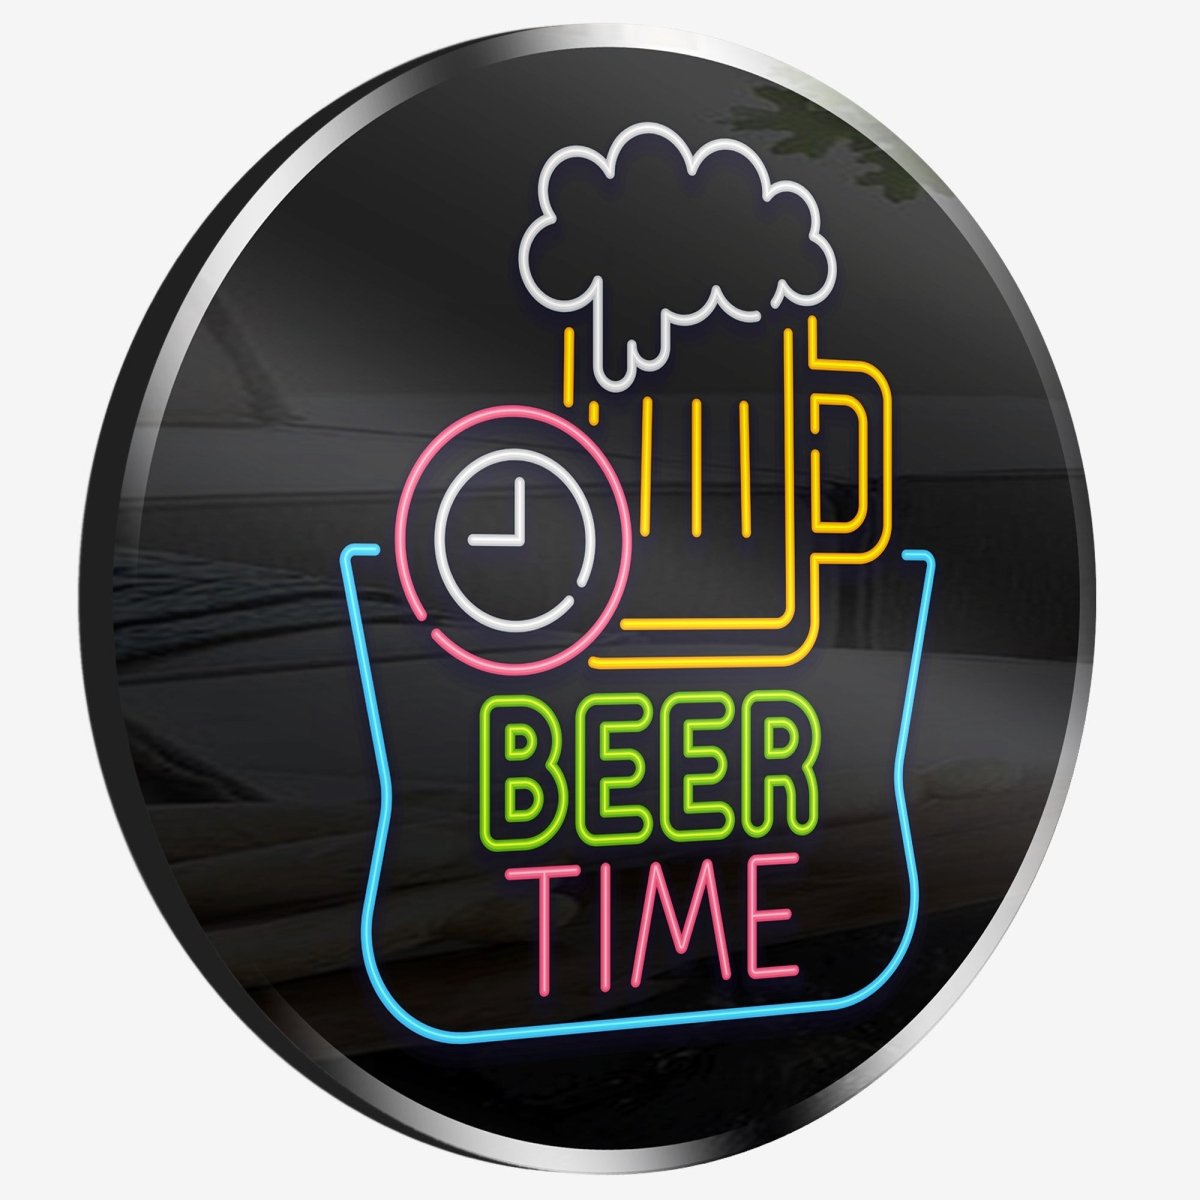 Personalized Neon Sign Beer Time - madaboutneon